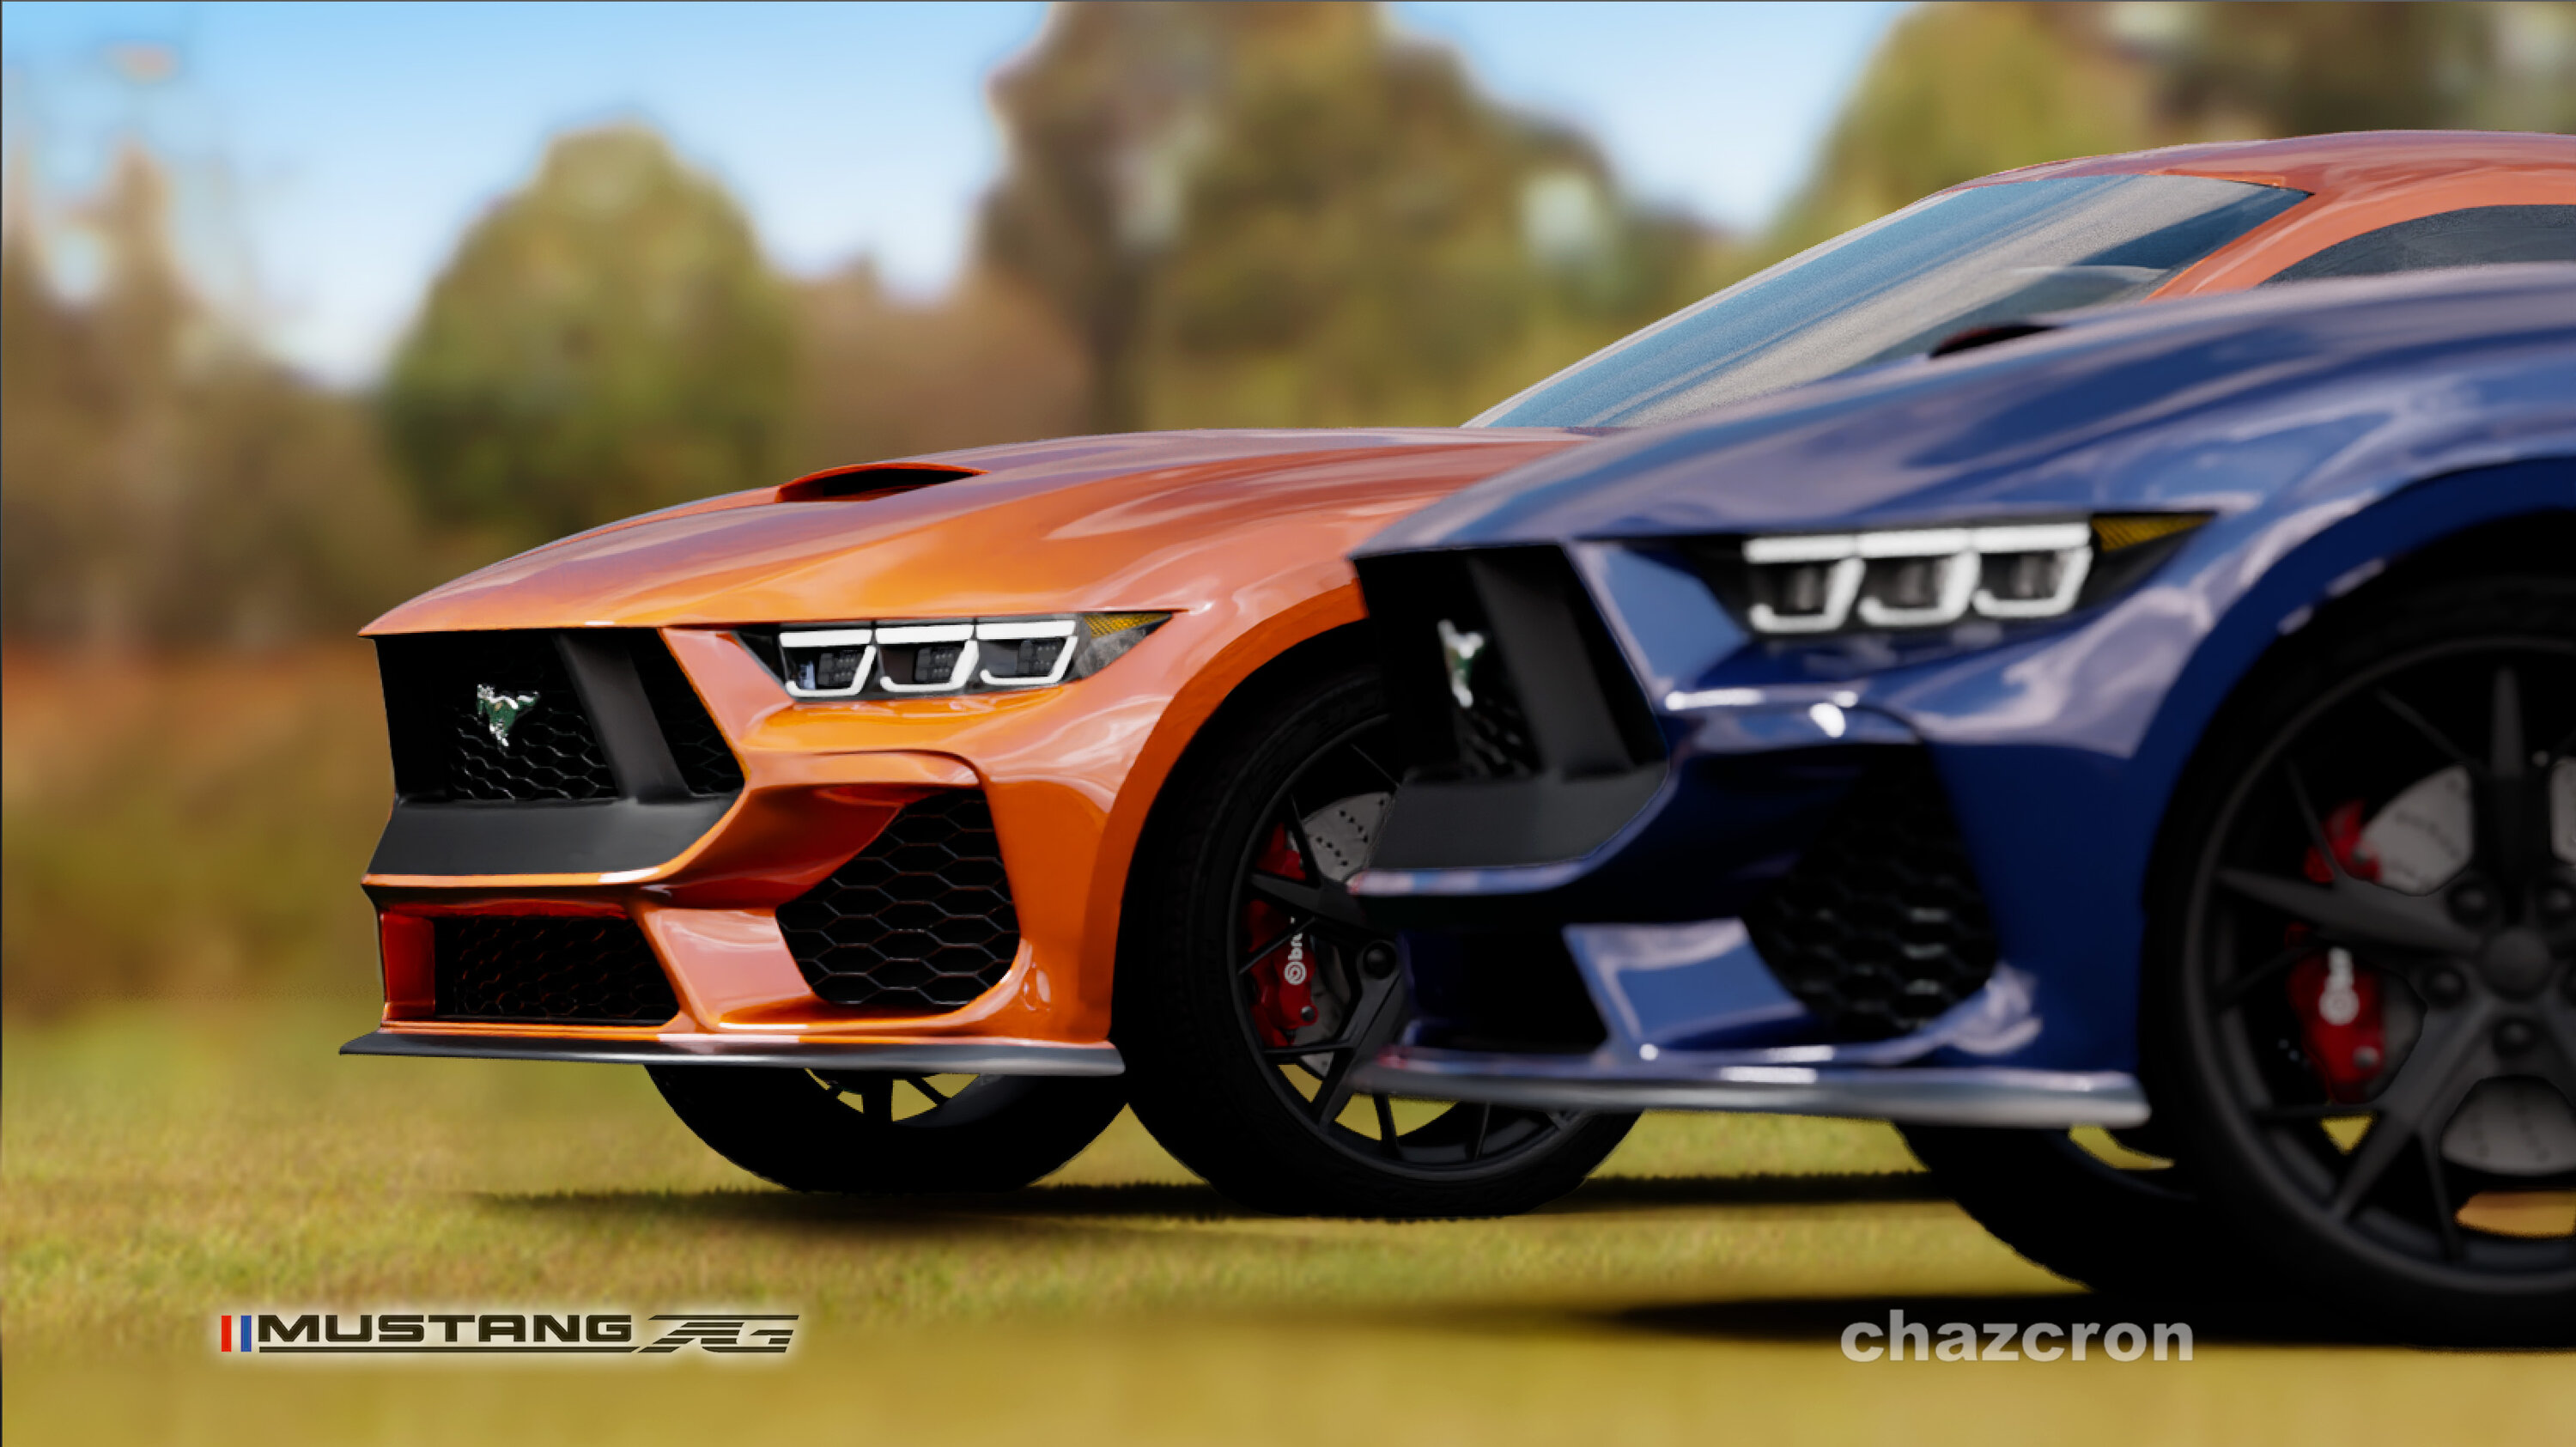 S650 Mustang chazcron weighs in... 7th gen 2023 Mustang S650 3D model & renderings in several colors! Country-Side